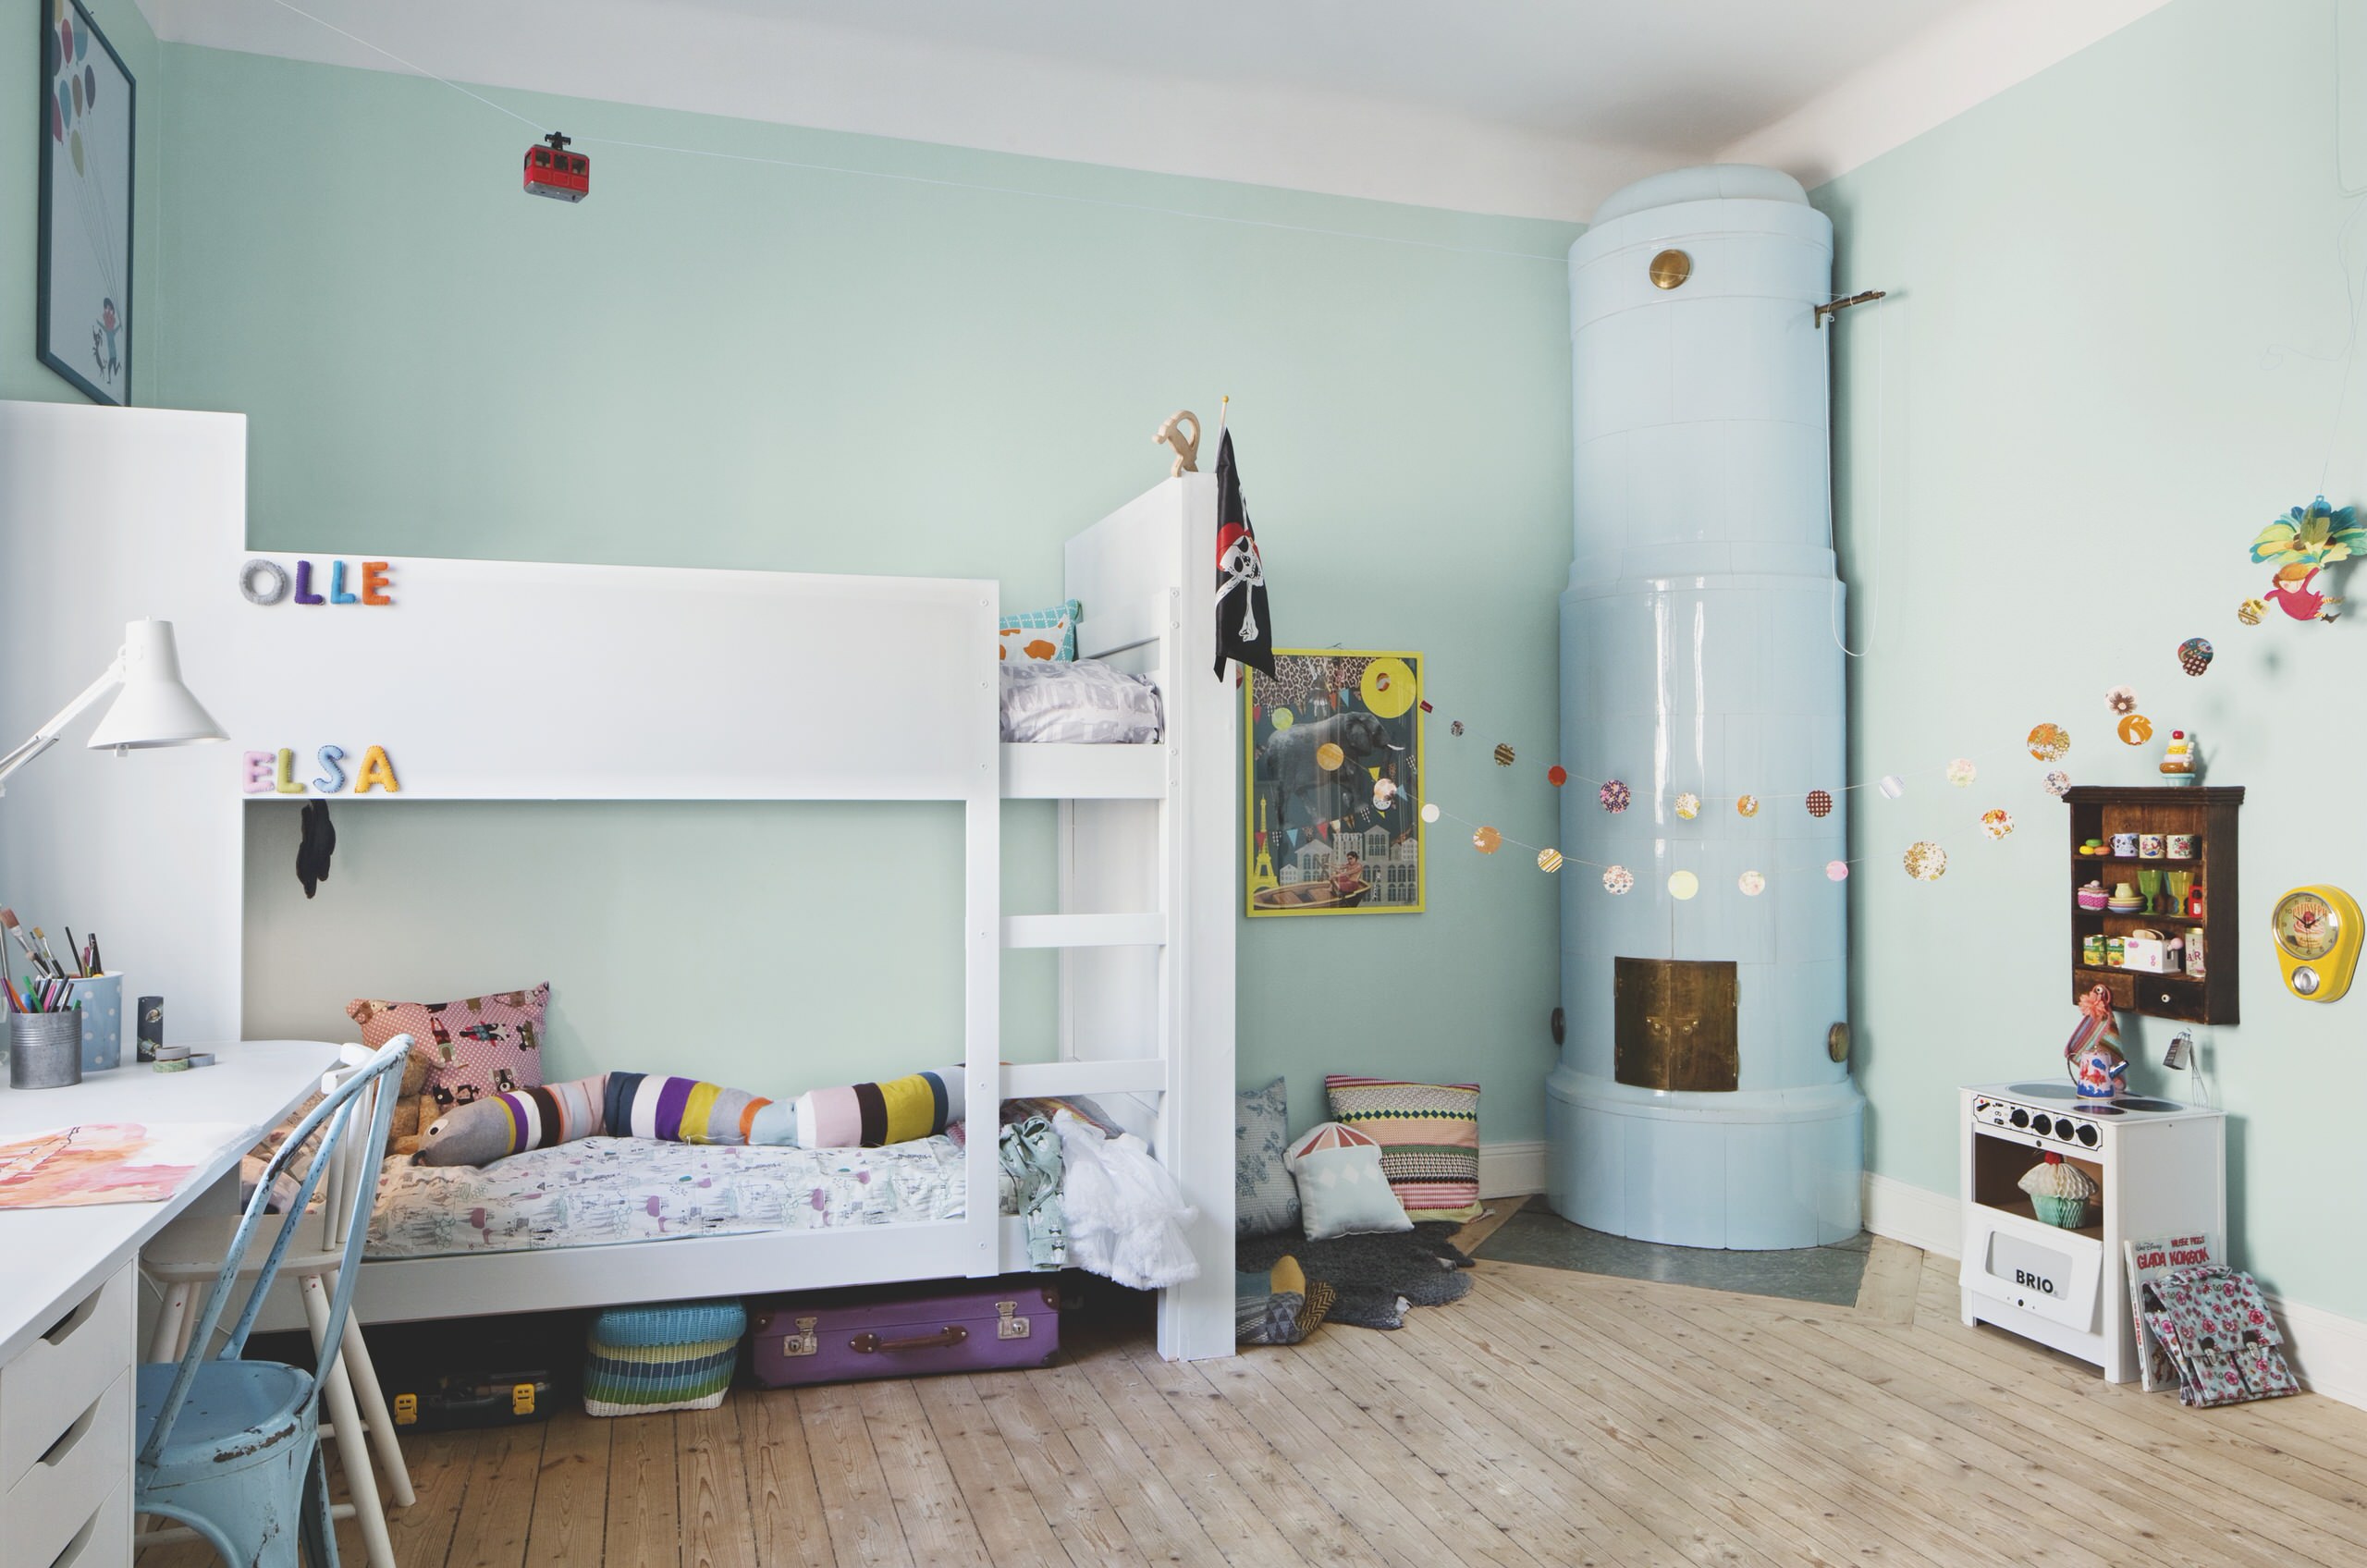 What To Consider When Designing A Kid Friendly Space